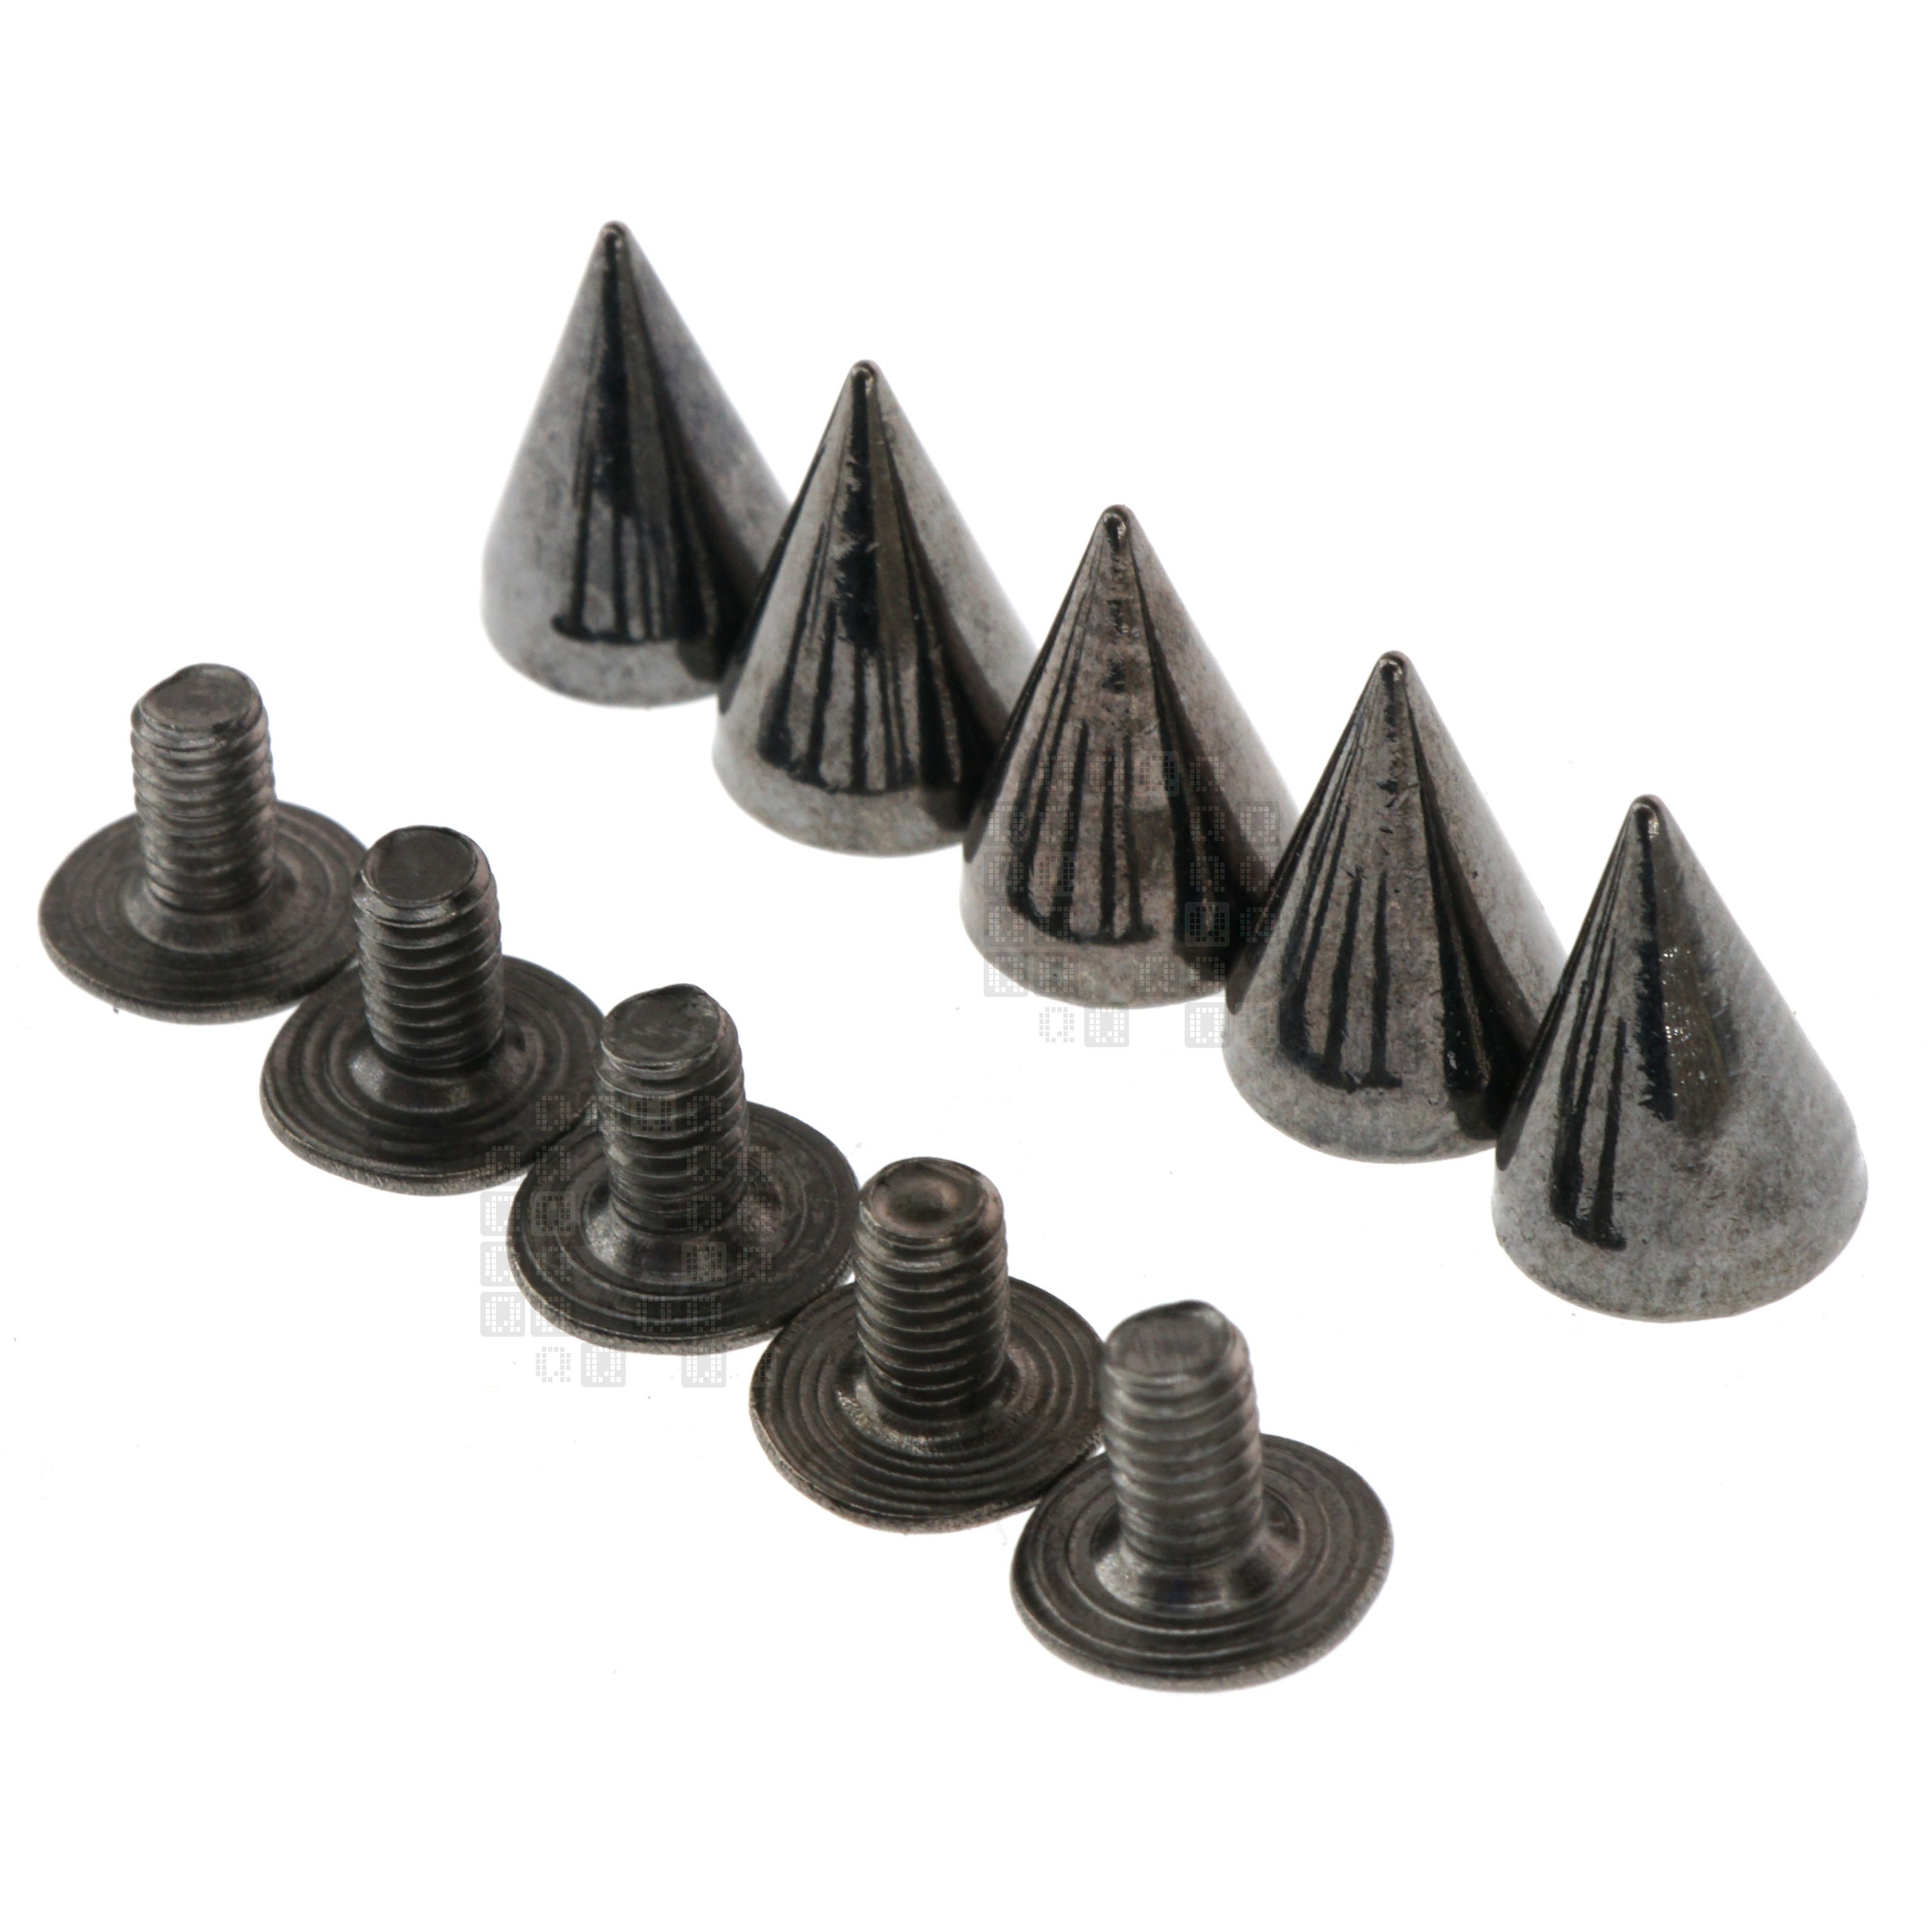 Gunmetal Conical Spike with Screw, 7x10mm, M3-0.5mm Threaded, 5 Pack